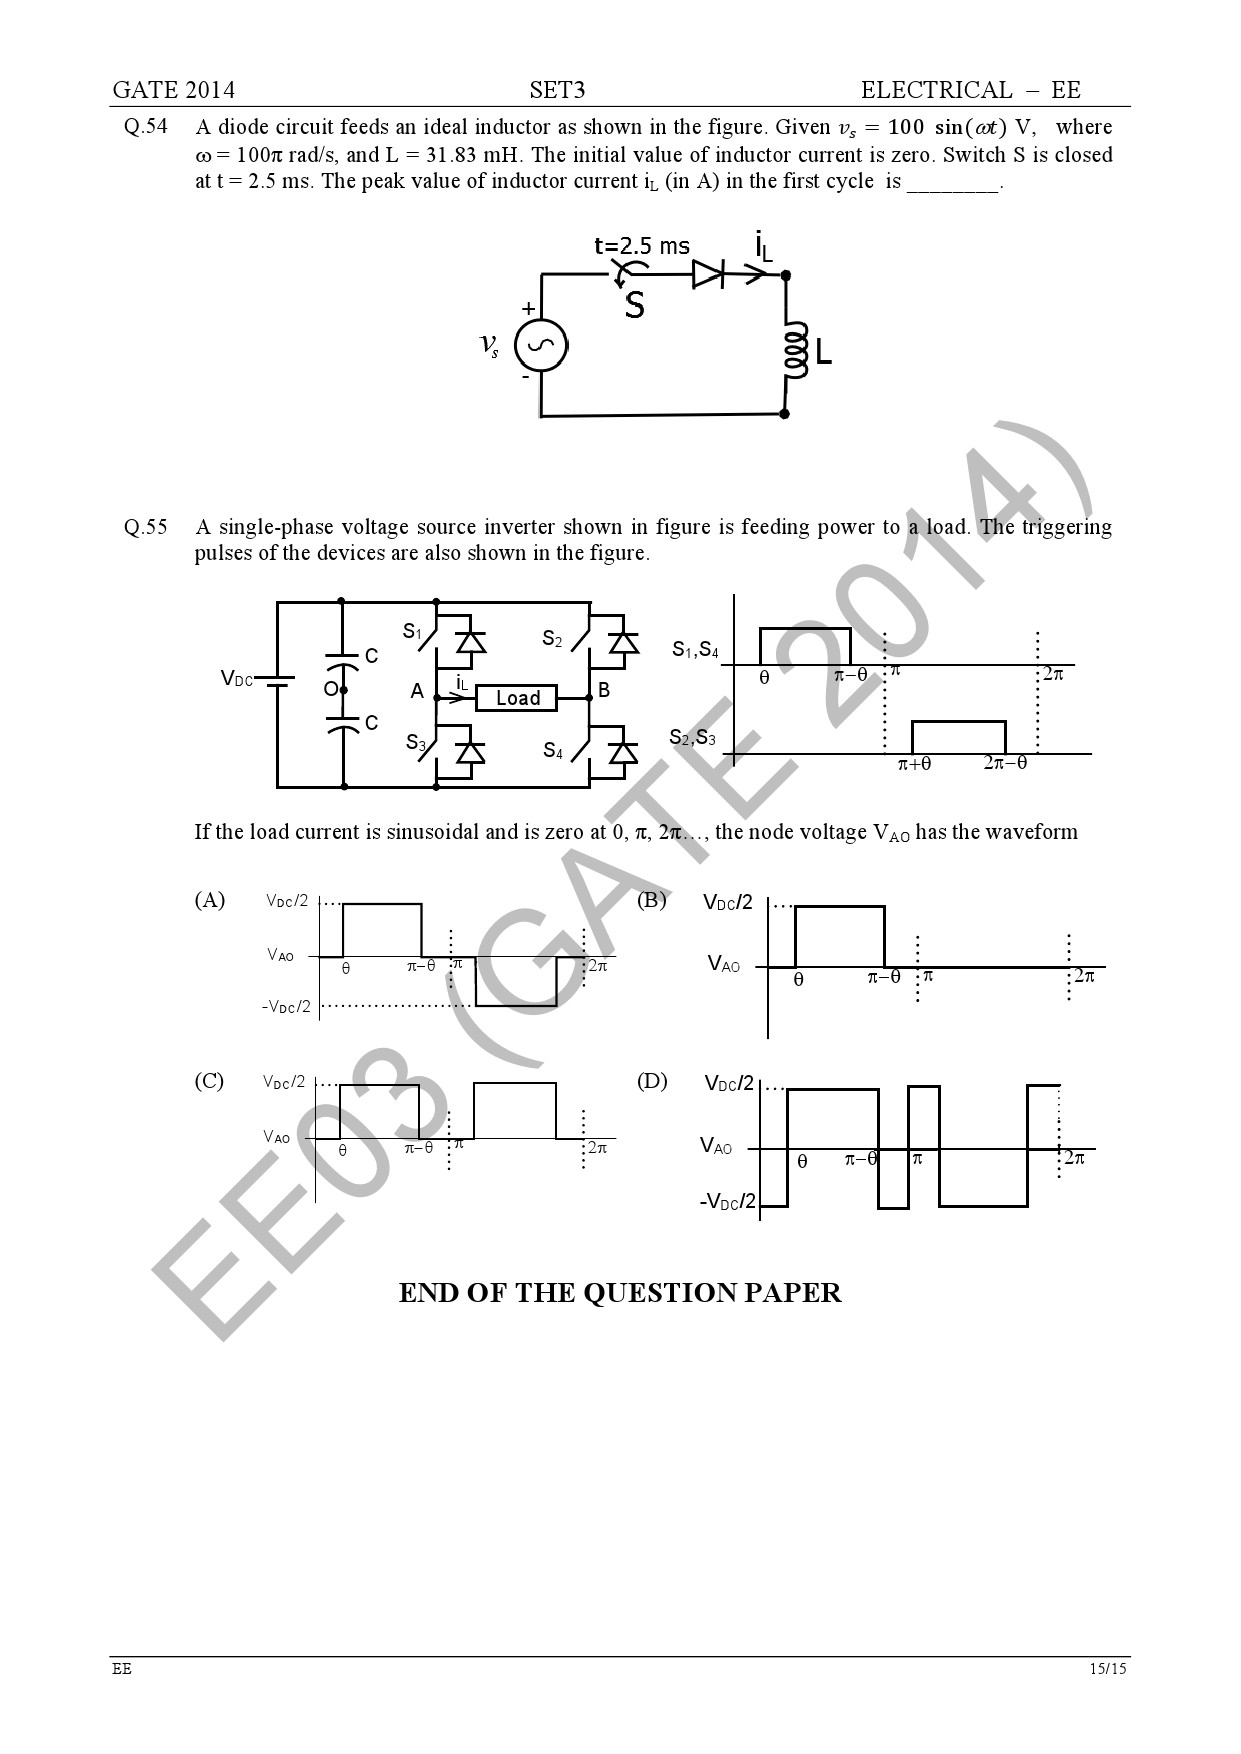 GATE Exam Question Paper 2014 Electrical Engineering Set 3 21